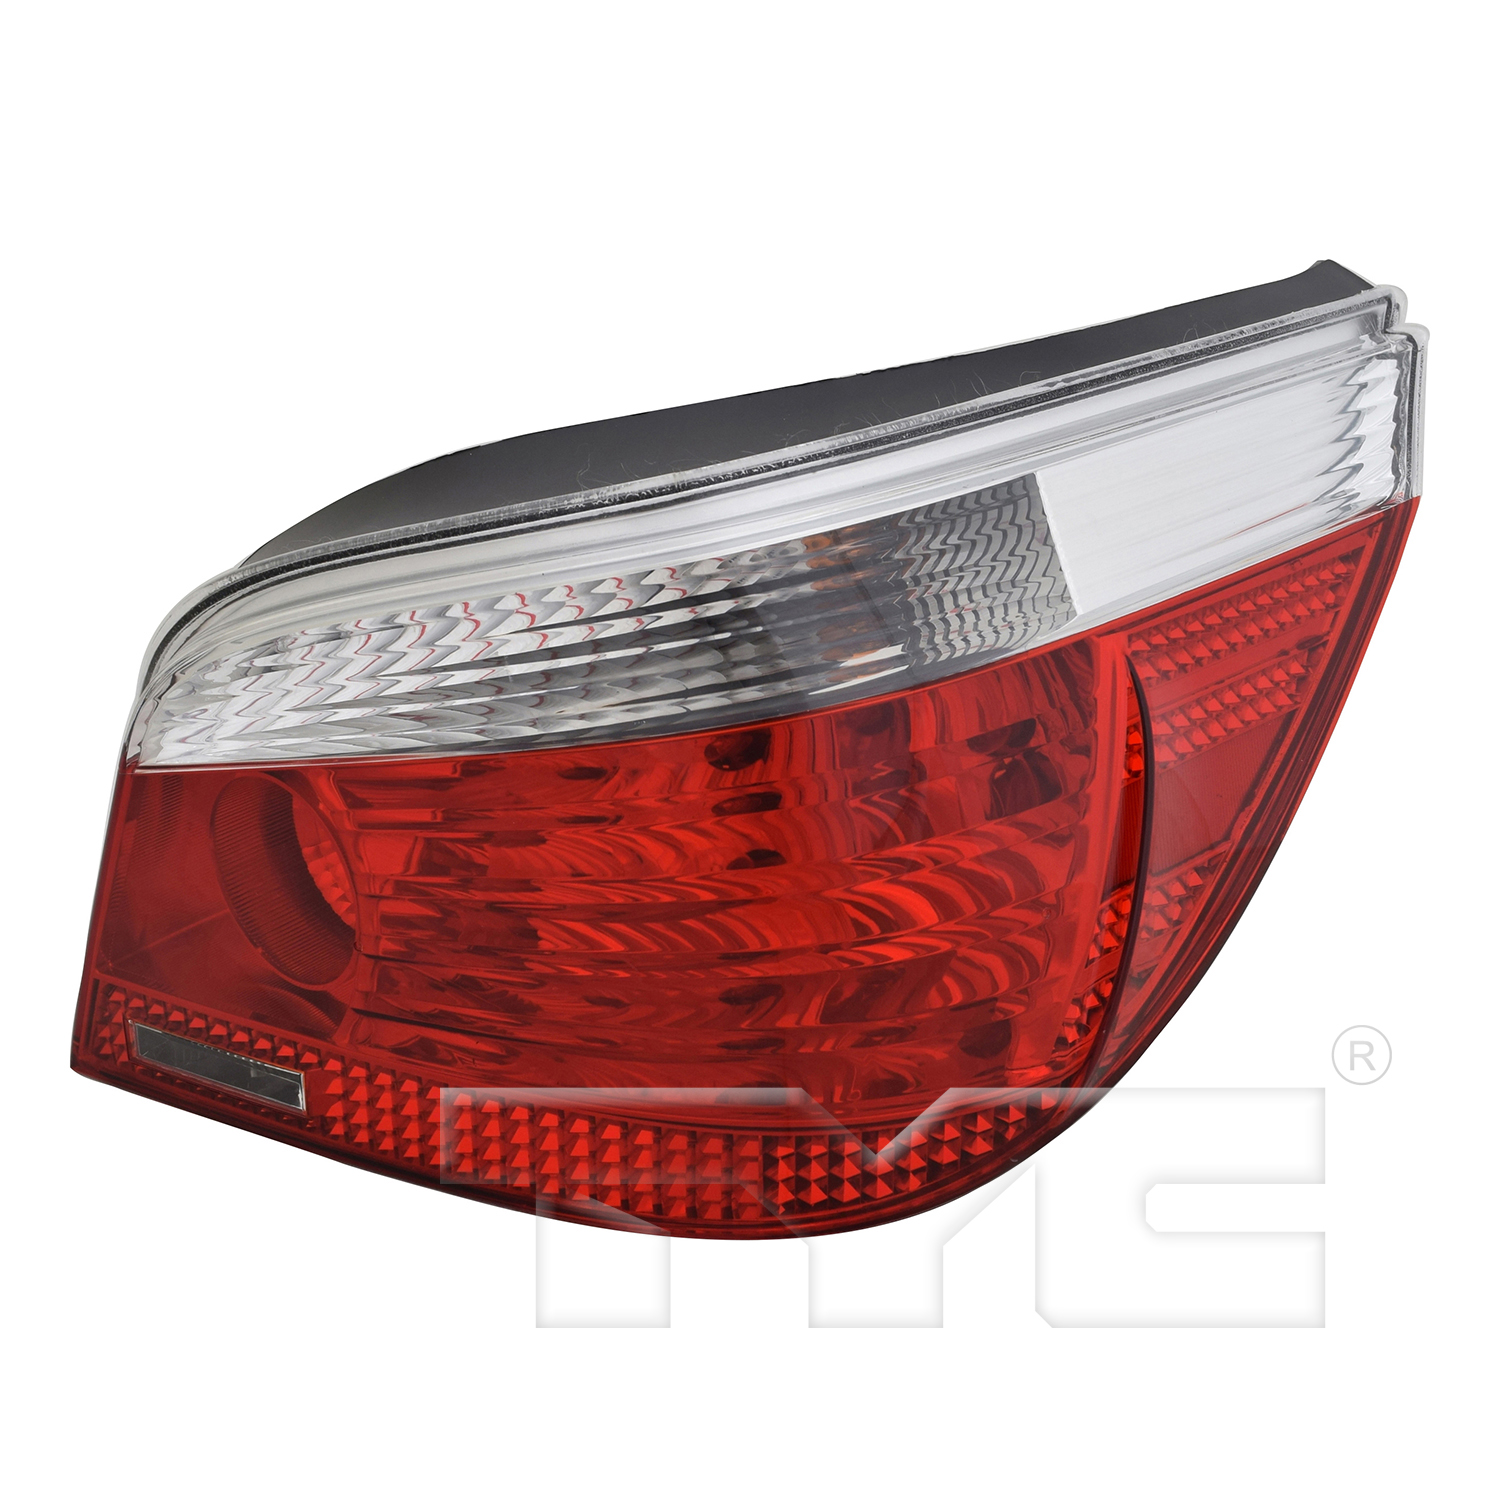 Aftermarket TAILLIGHTS for BMW - 545I, 545i,04-05,RT Taillamp assy